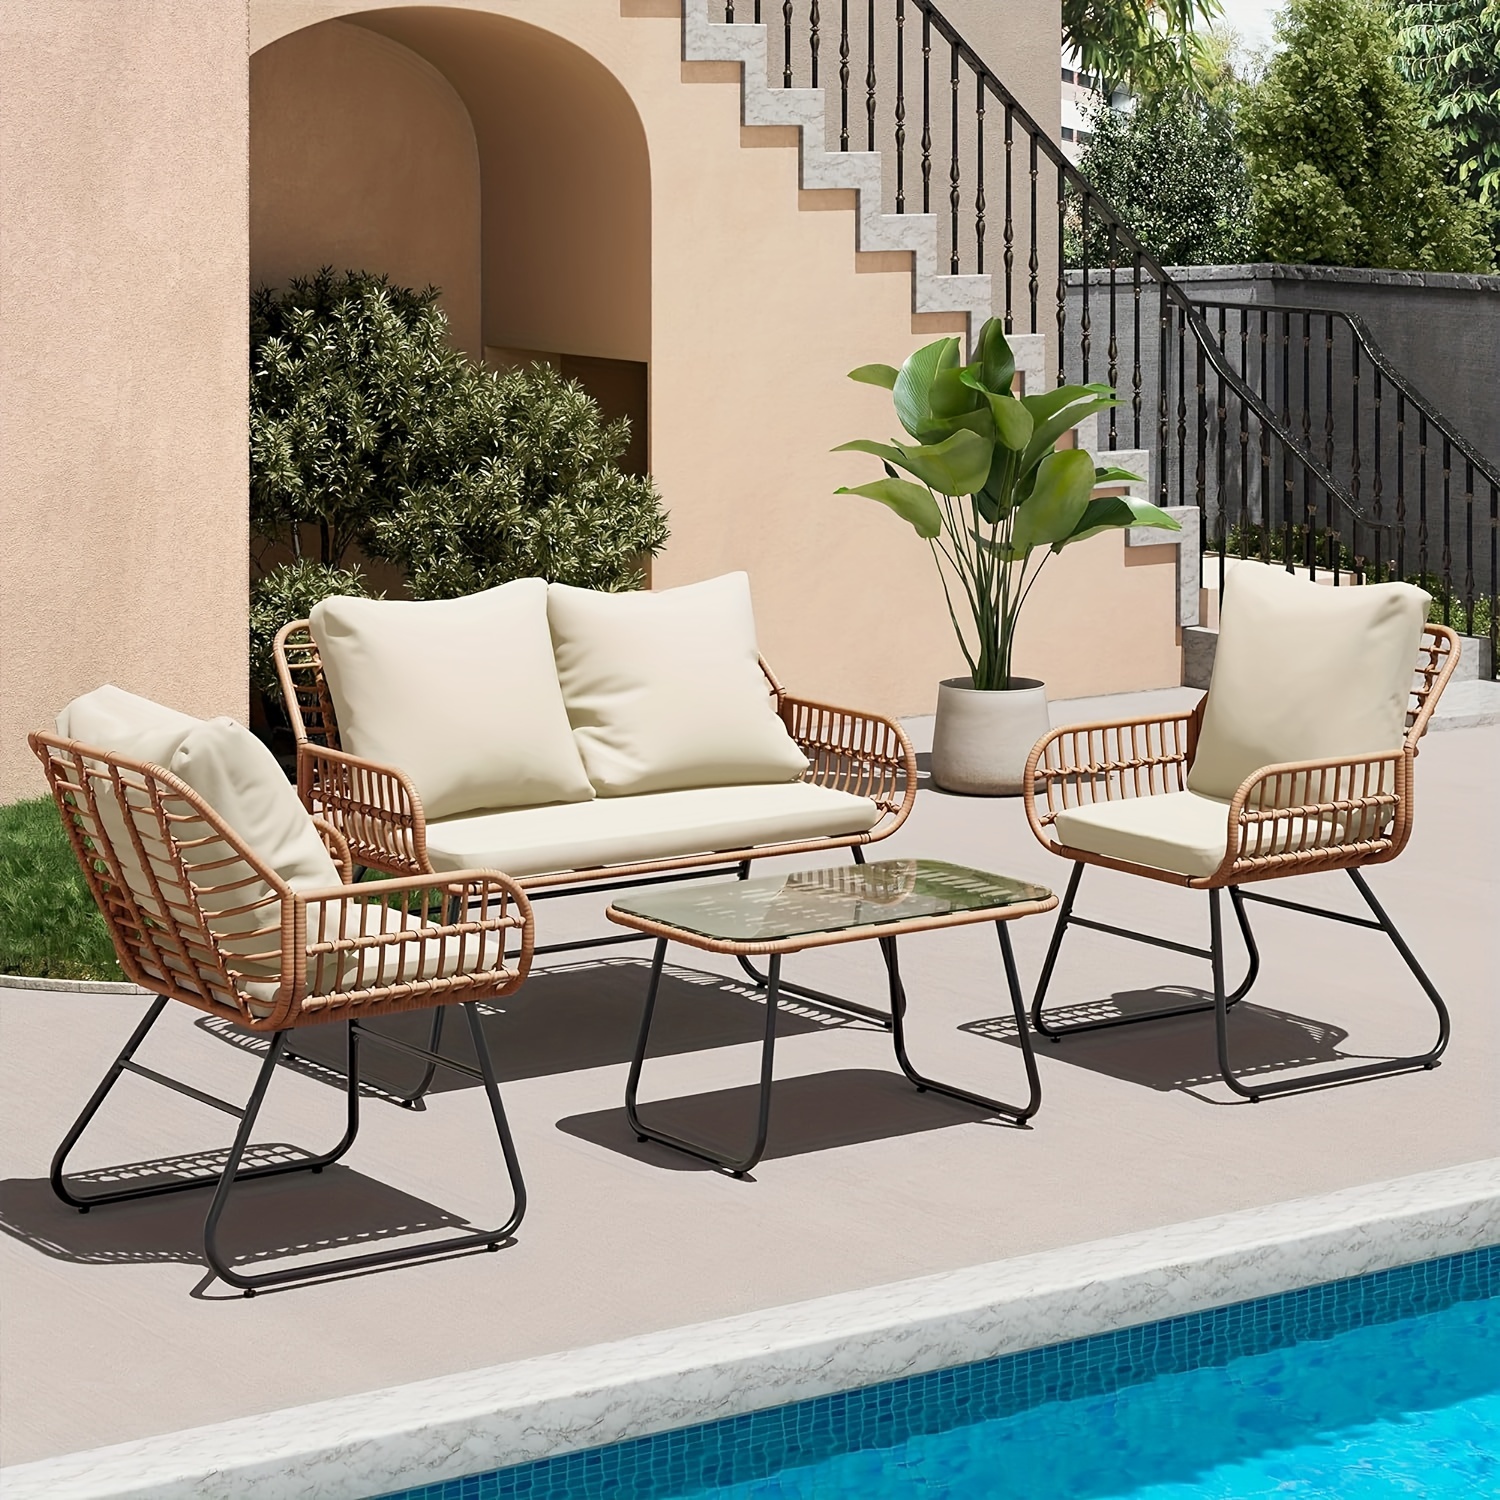 

4-piece Rattan Patio Furniture Set, All-weather Bistro Conversation Loveseat, Chairs, And Table Set For Outdoor Living Spaces, With Cushions And Metal Table